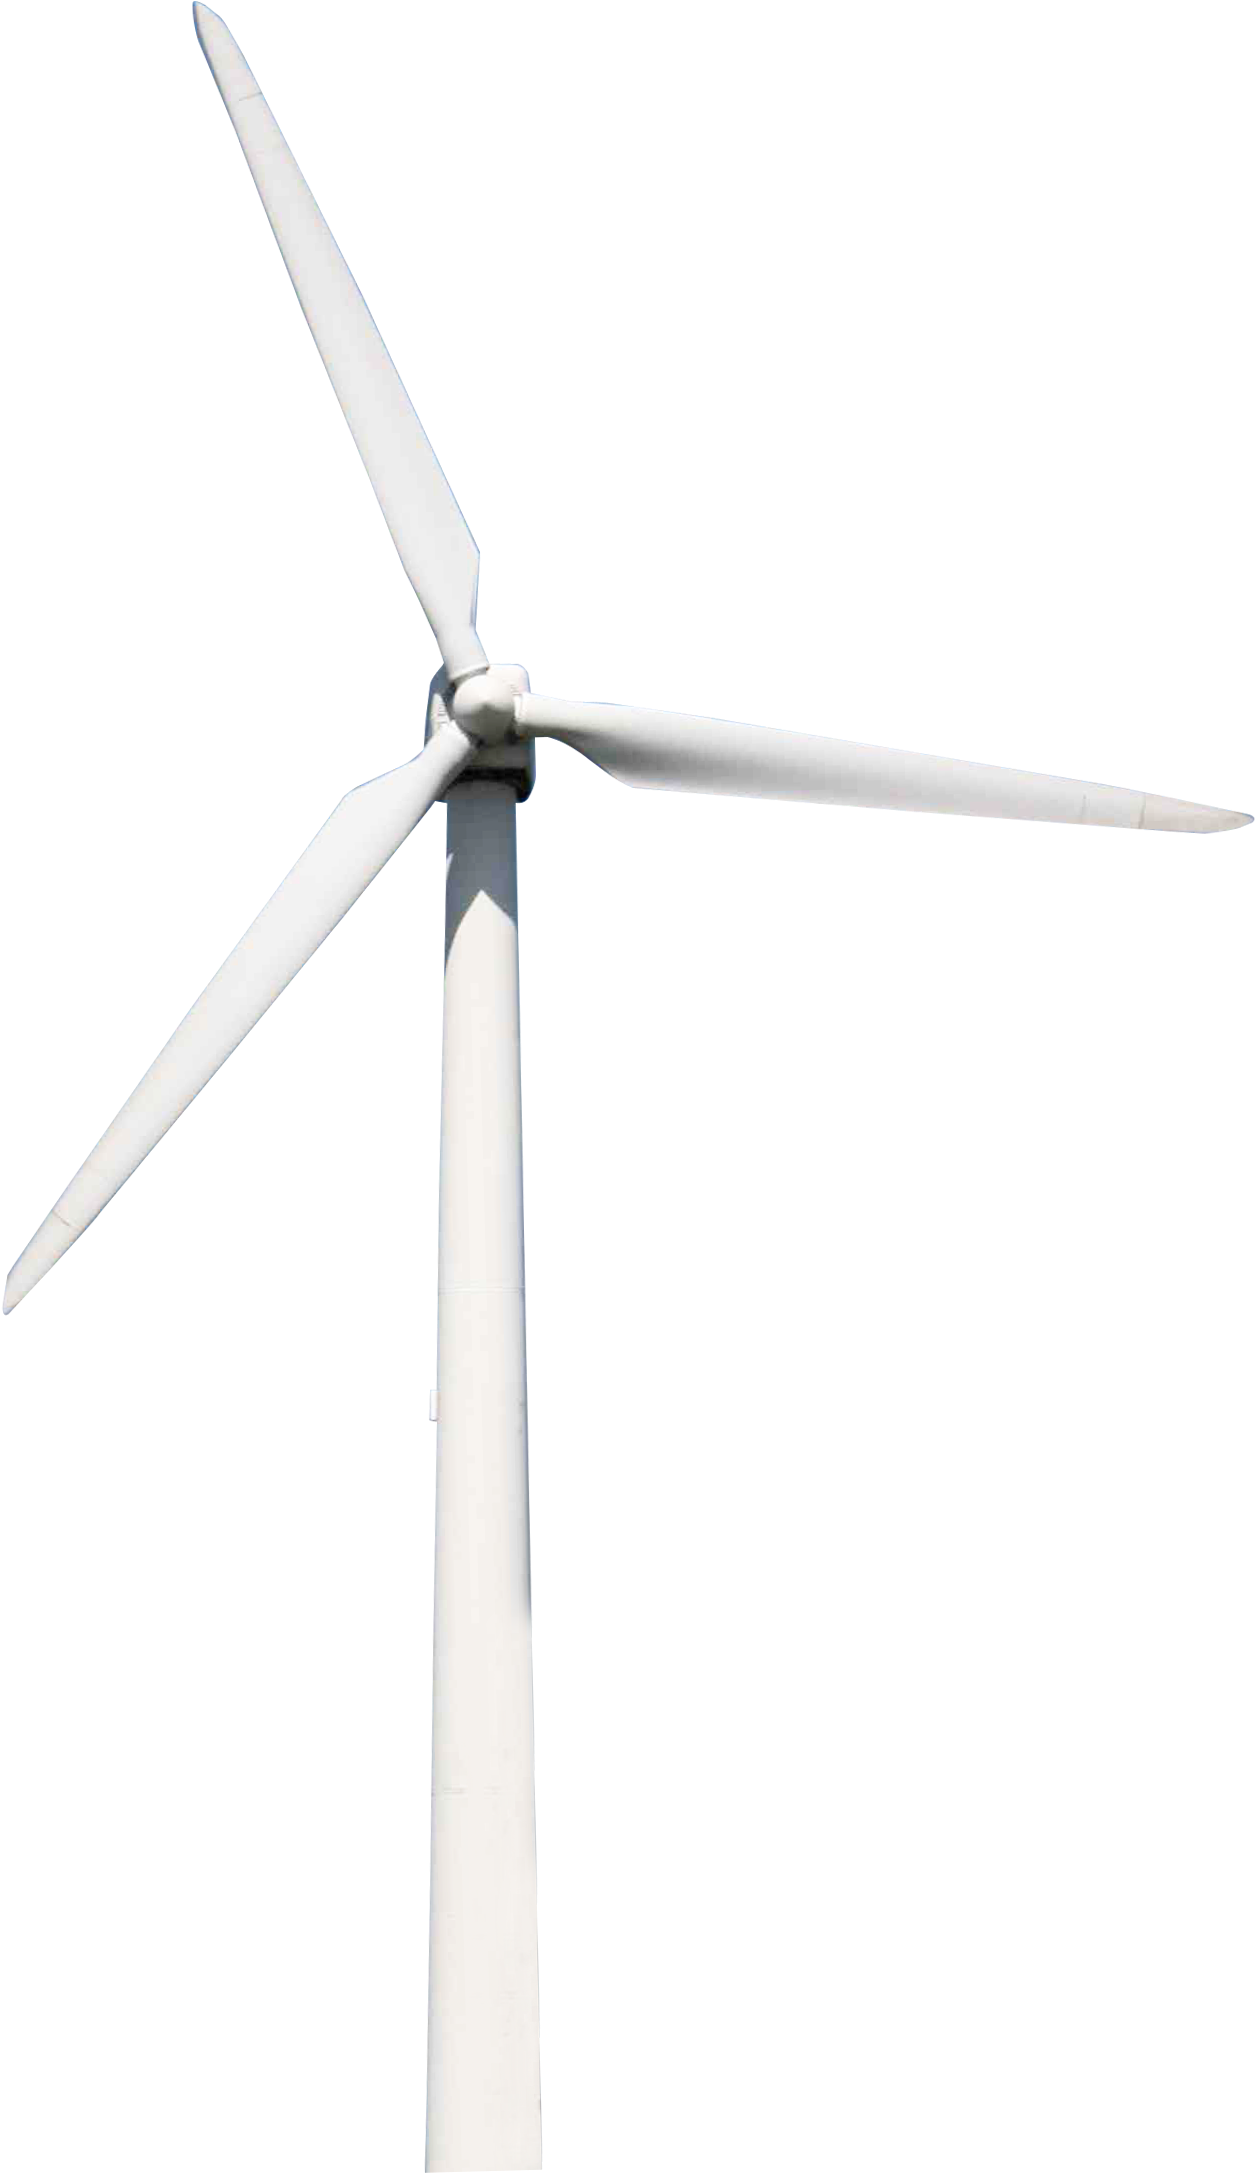 A White Windmill With Black Background